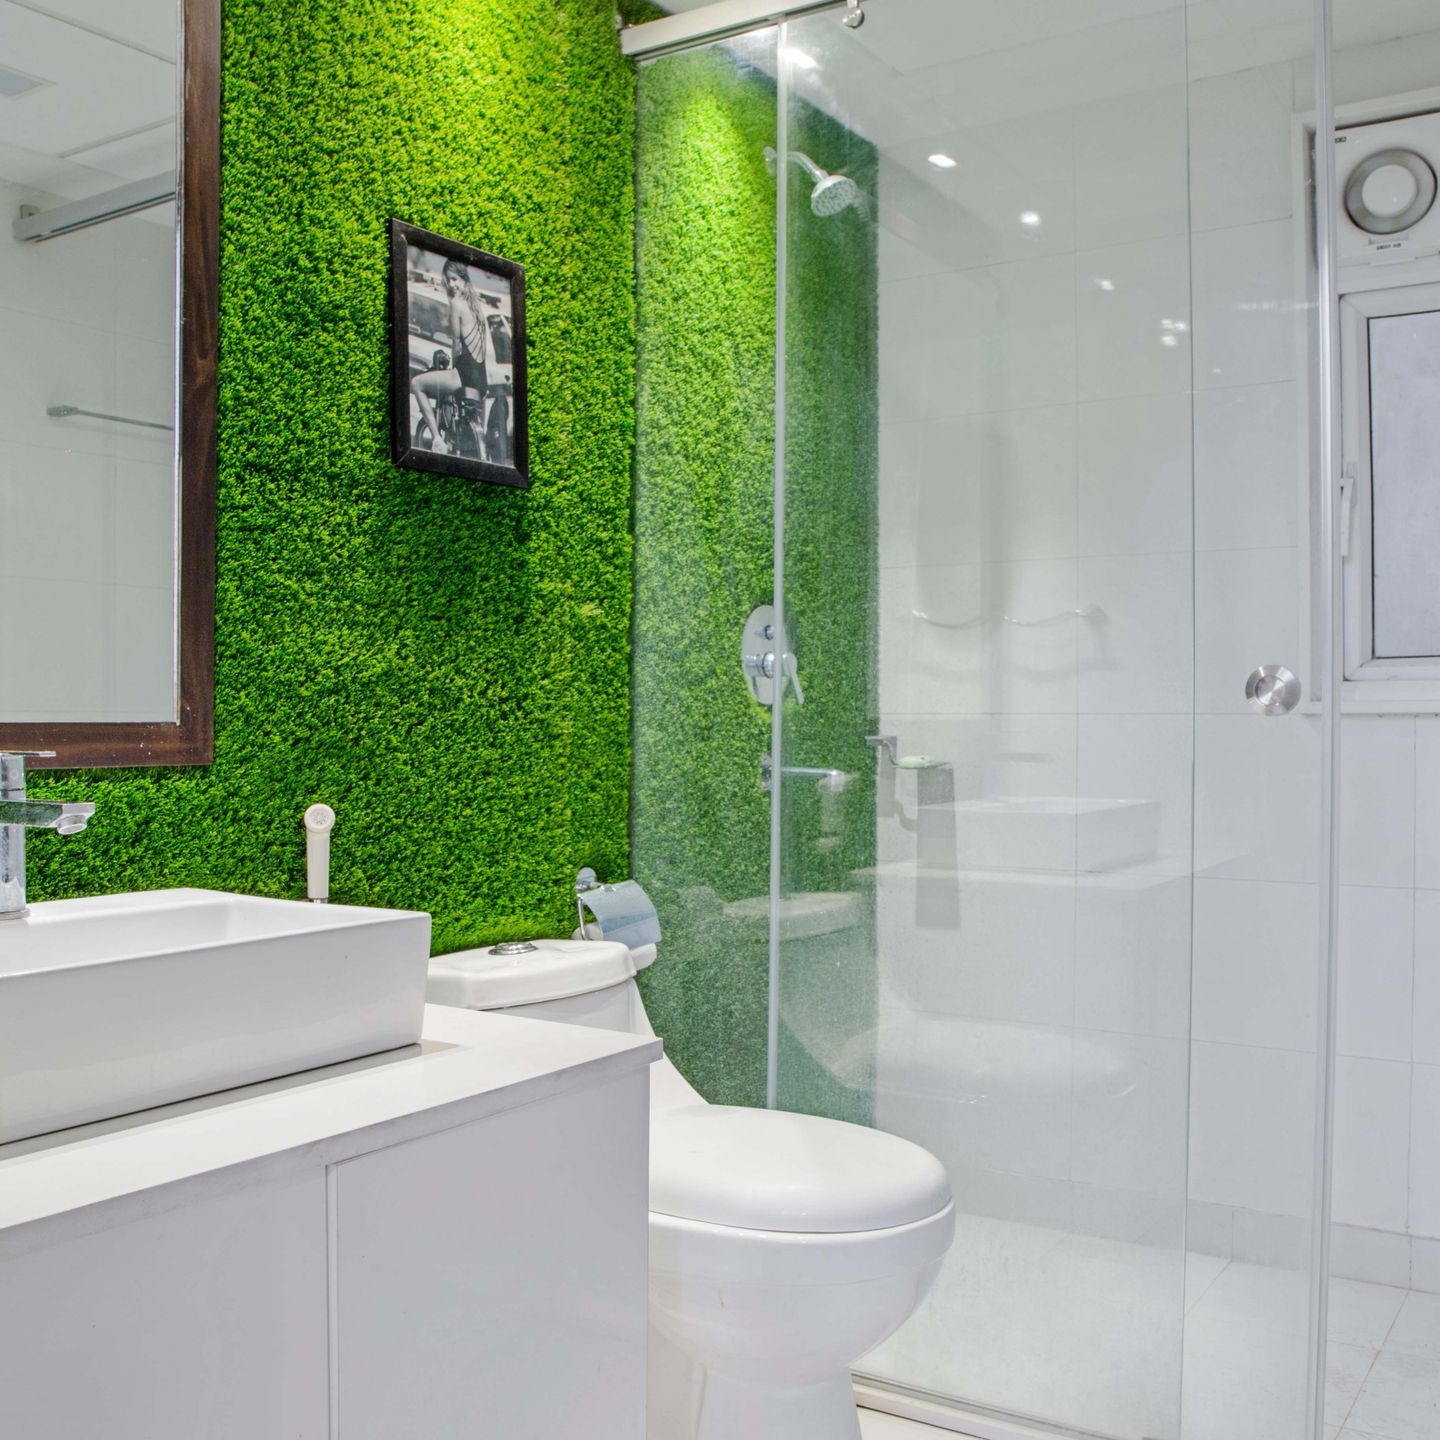 Small Bathroom With Grass Wall - Livspace